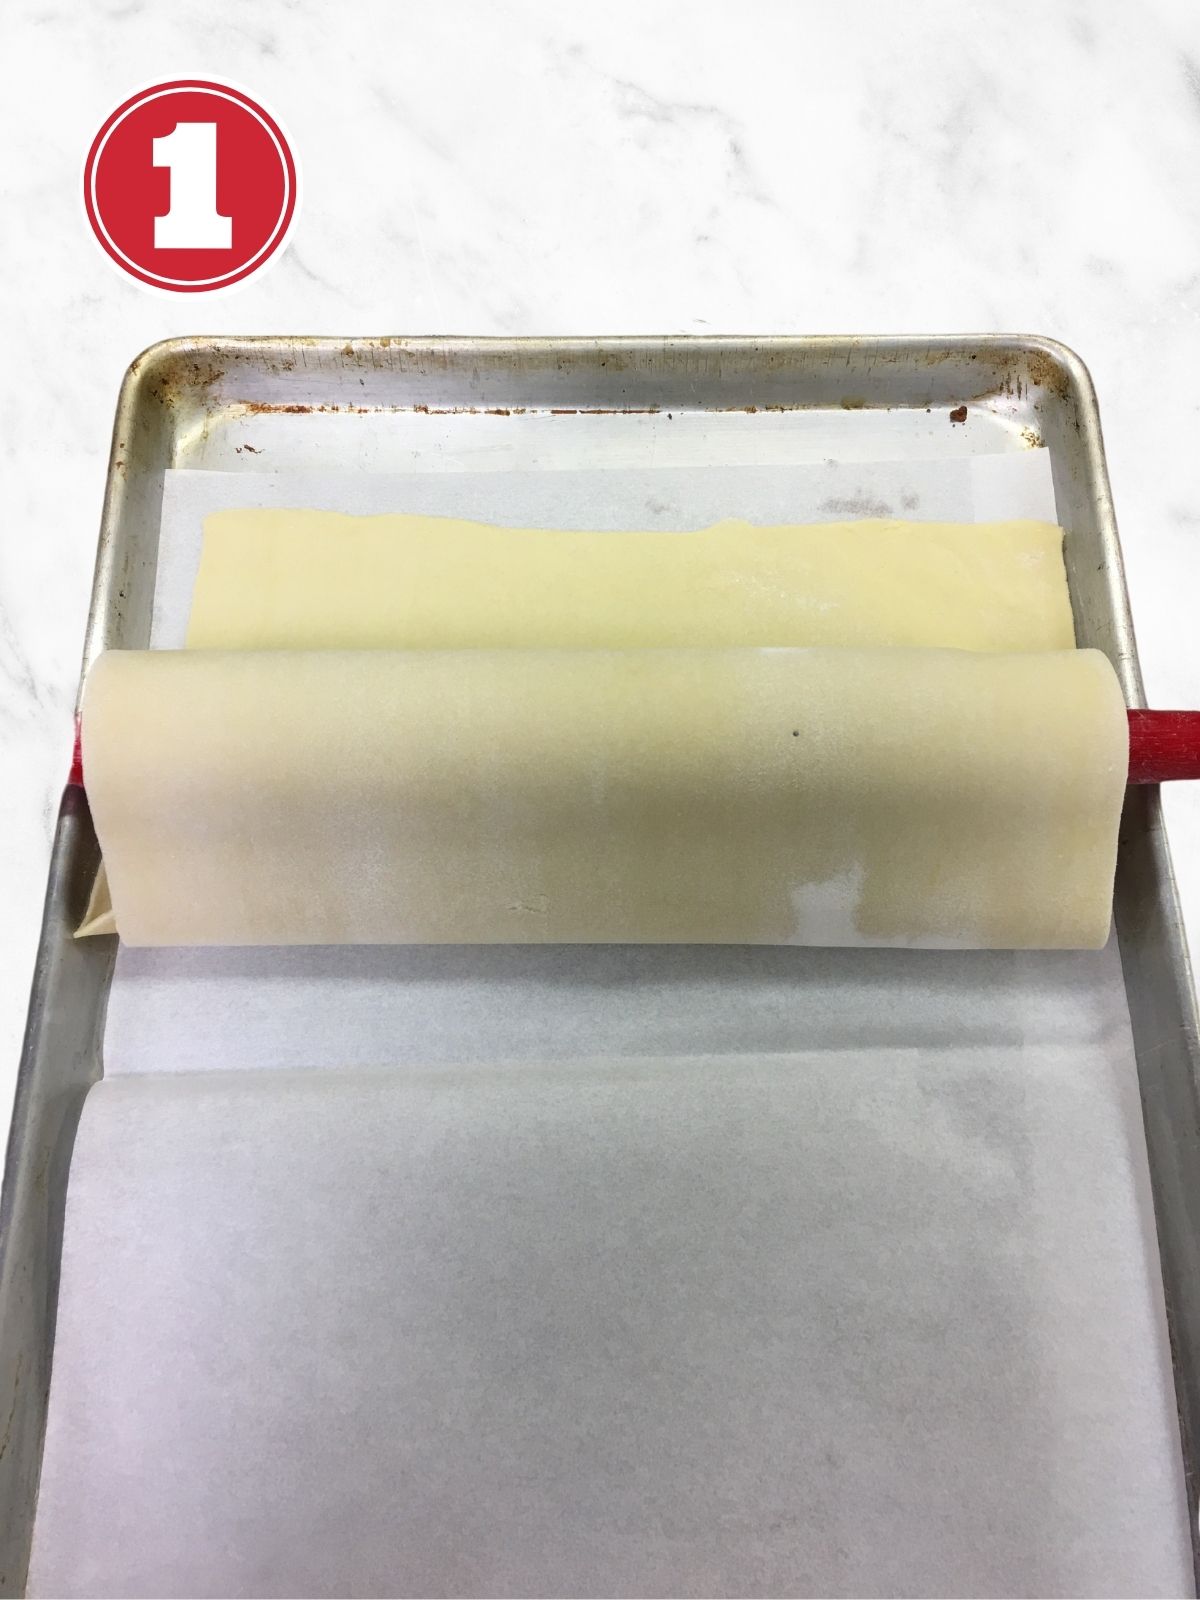 transferring puff pastry on a baking sheet